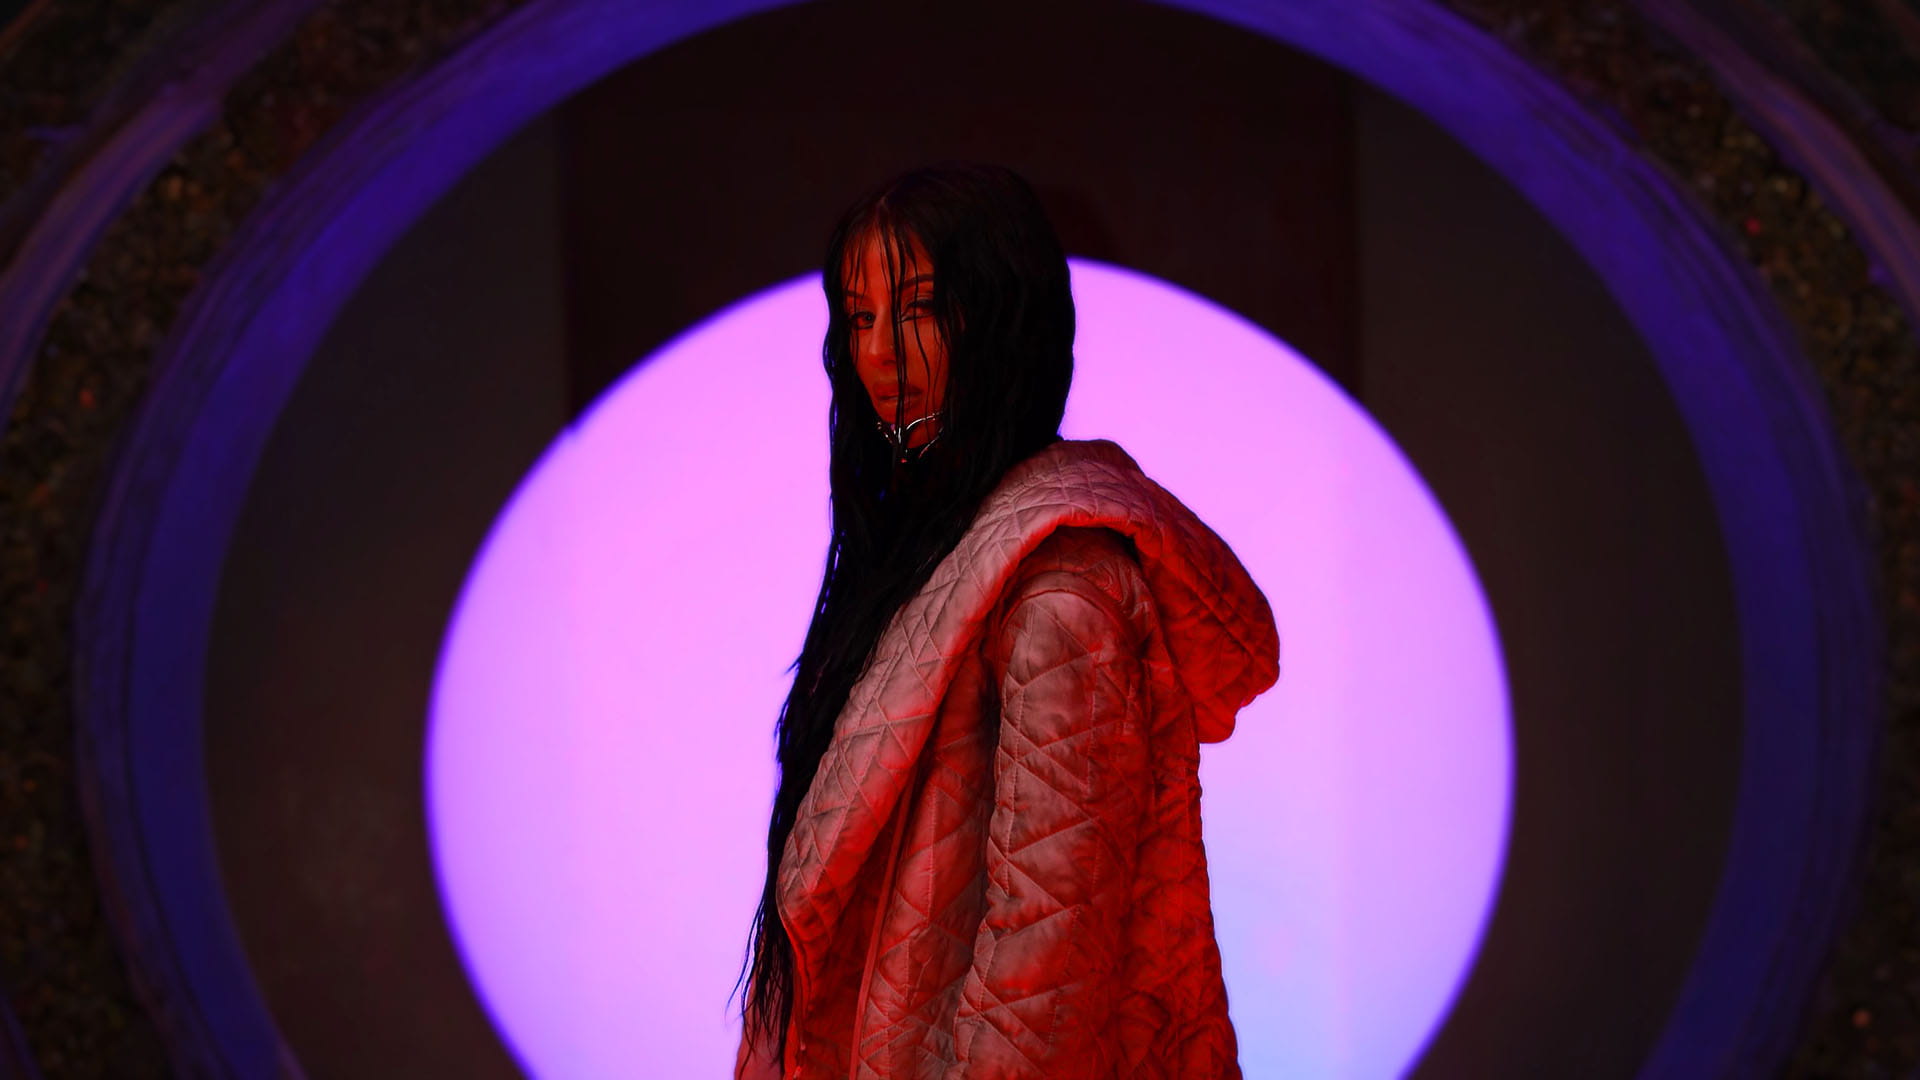 SAGEALINA in profile, wearing a textured jacket, against a glowing pink orb backdrop.